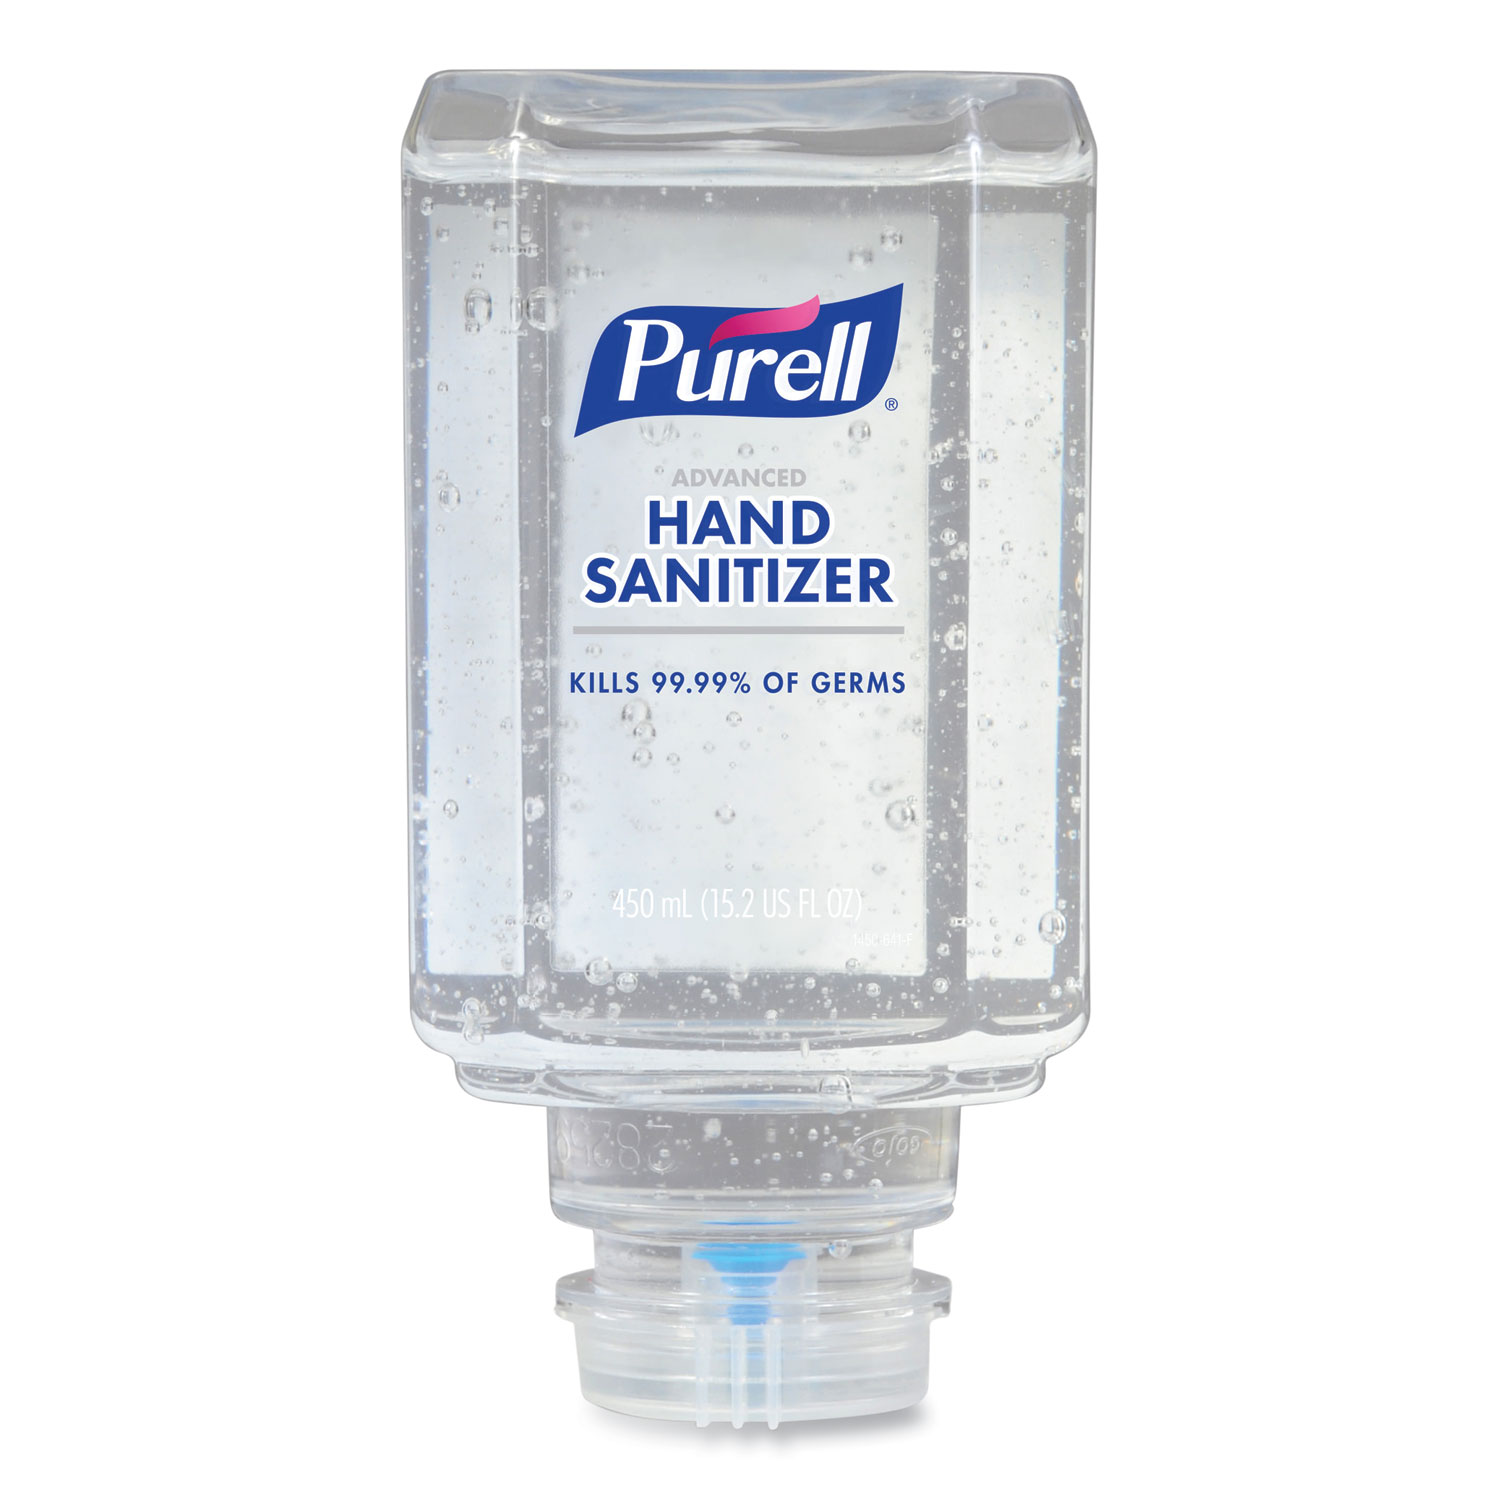 PURELL® Advanced Gel Hand Sanitizer, Clean Scent, For ES1, 450 mL Refill, 6/Carton